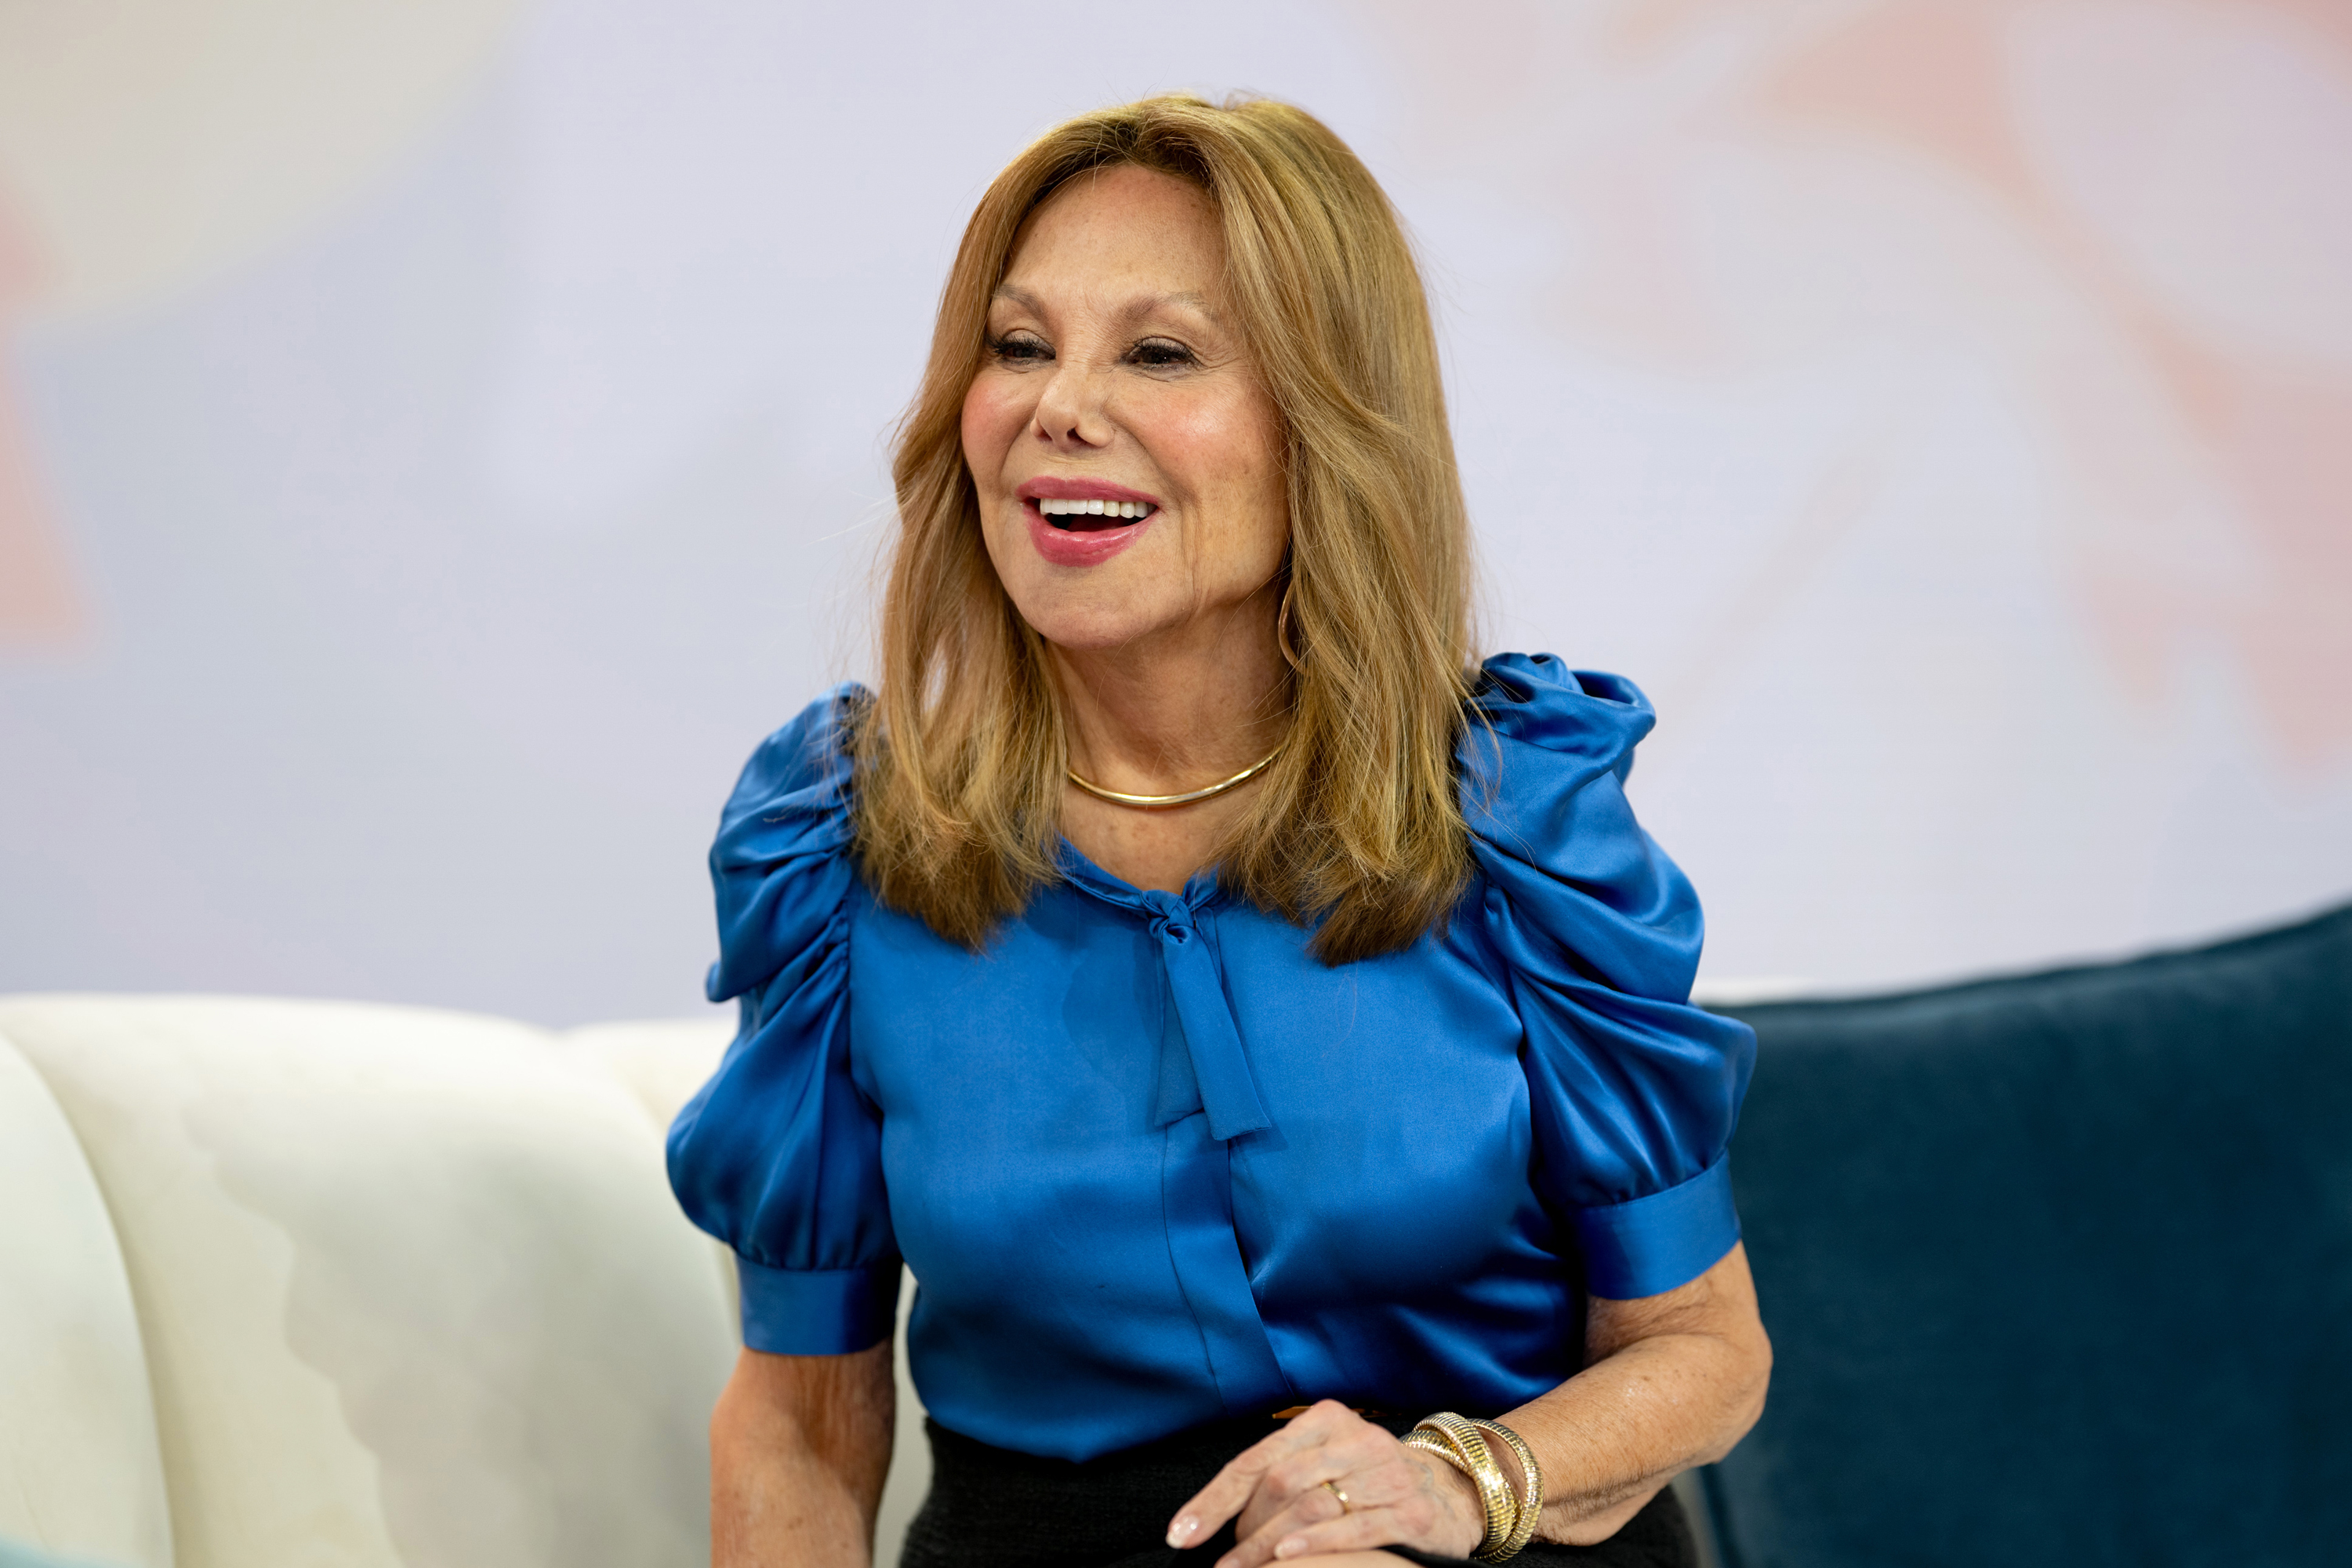 Marlo Thomas on "Today" on March 30, 2023. | Source: Getty Images